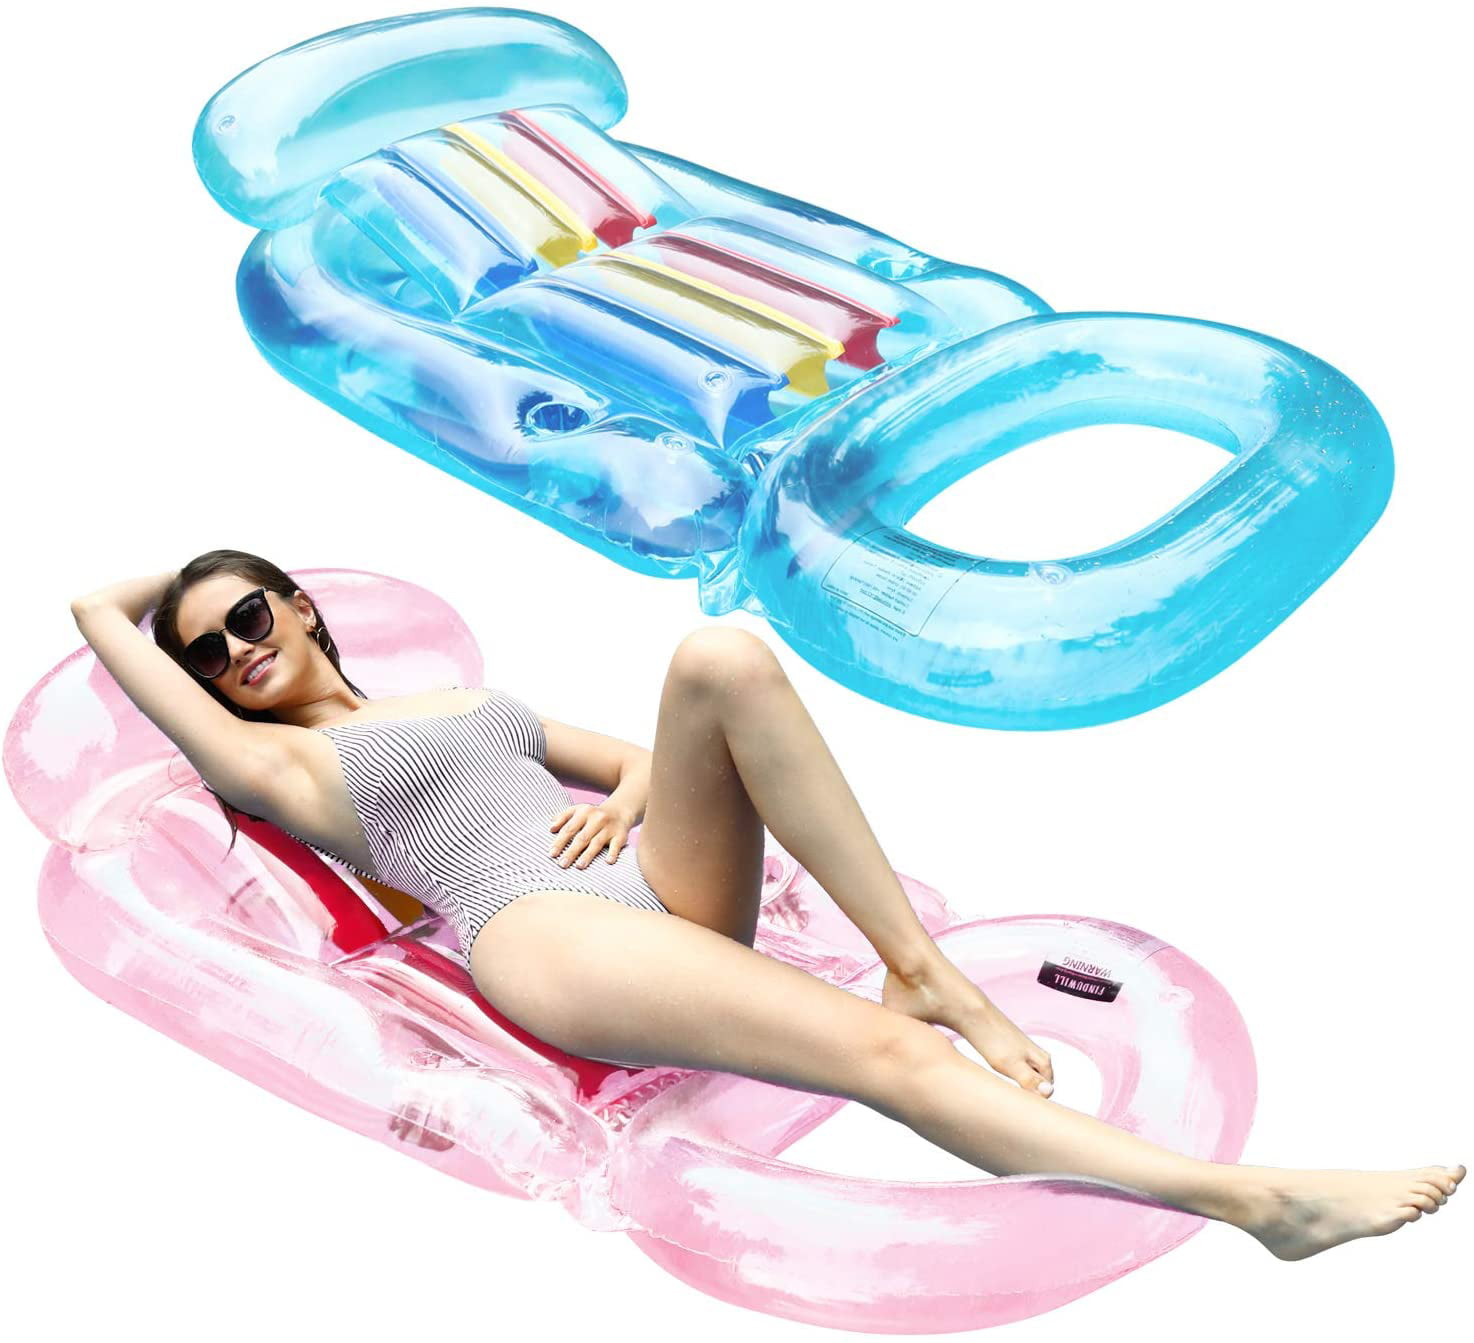 Details about   Inflatable Floating Lounge Pool Recliner Lounger Chair and Cup Holders by Intex